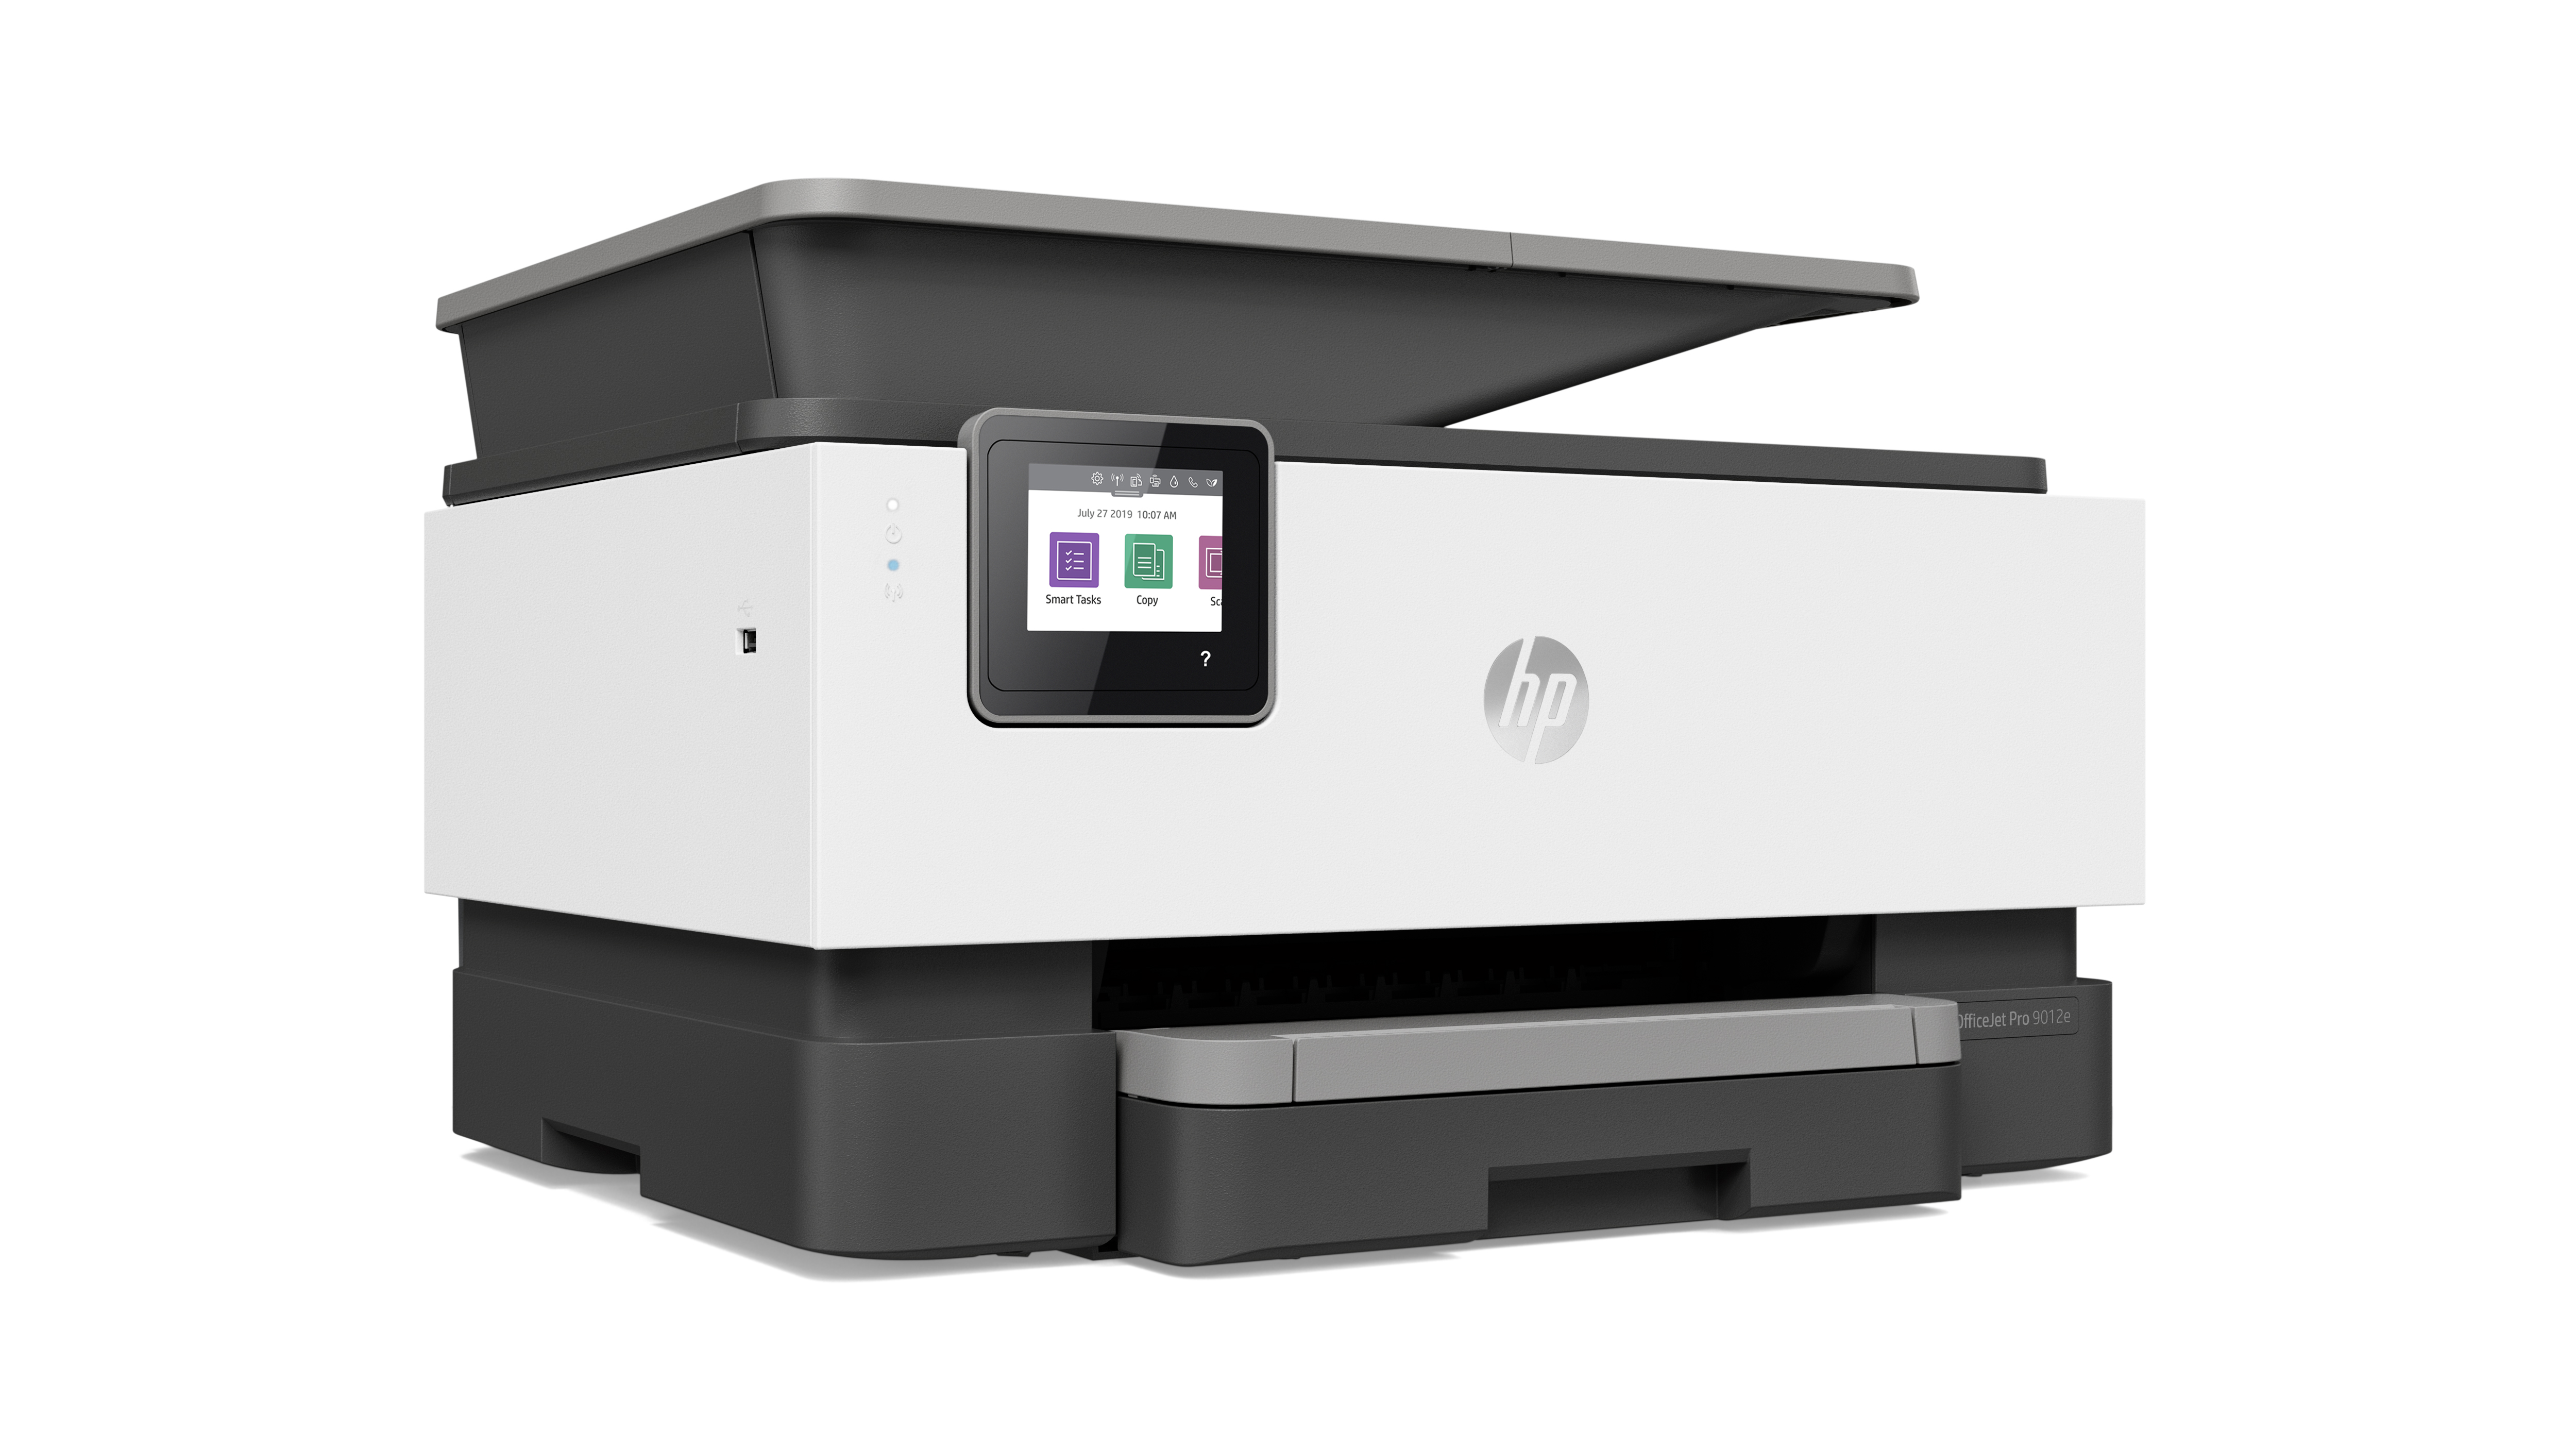 HP OfficeJet Pro 9012e review: Jack of all trades | ITPro